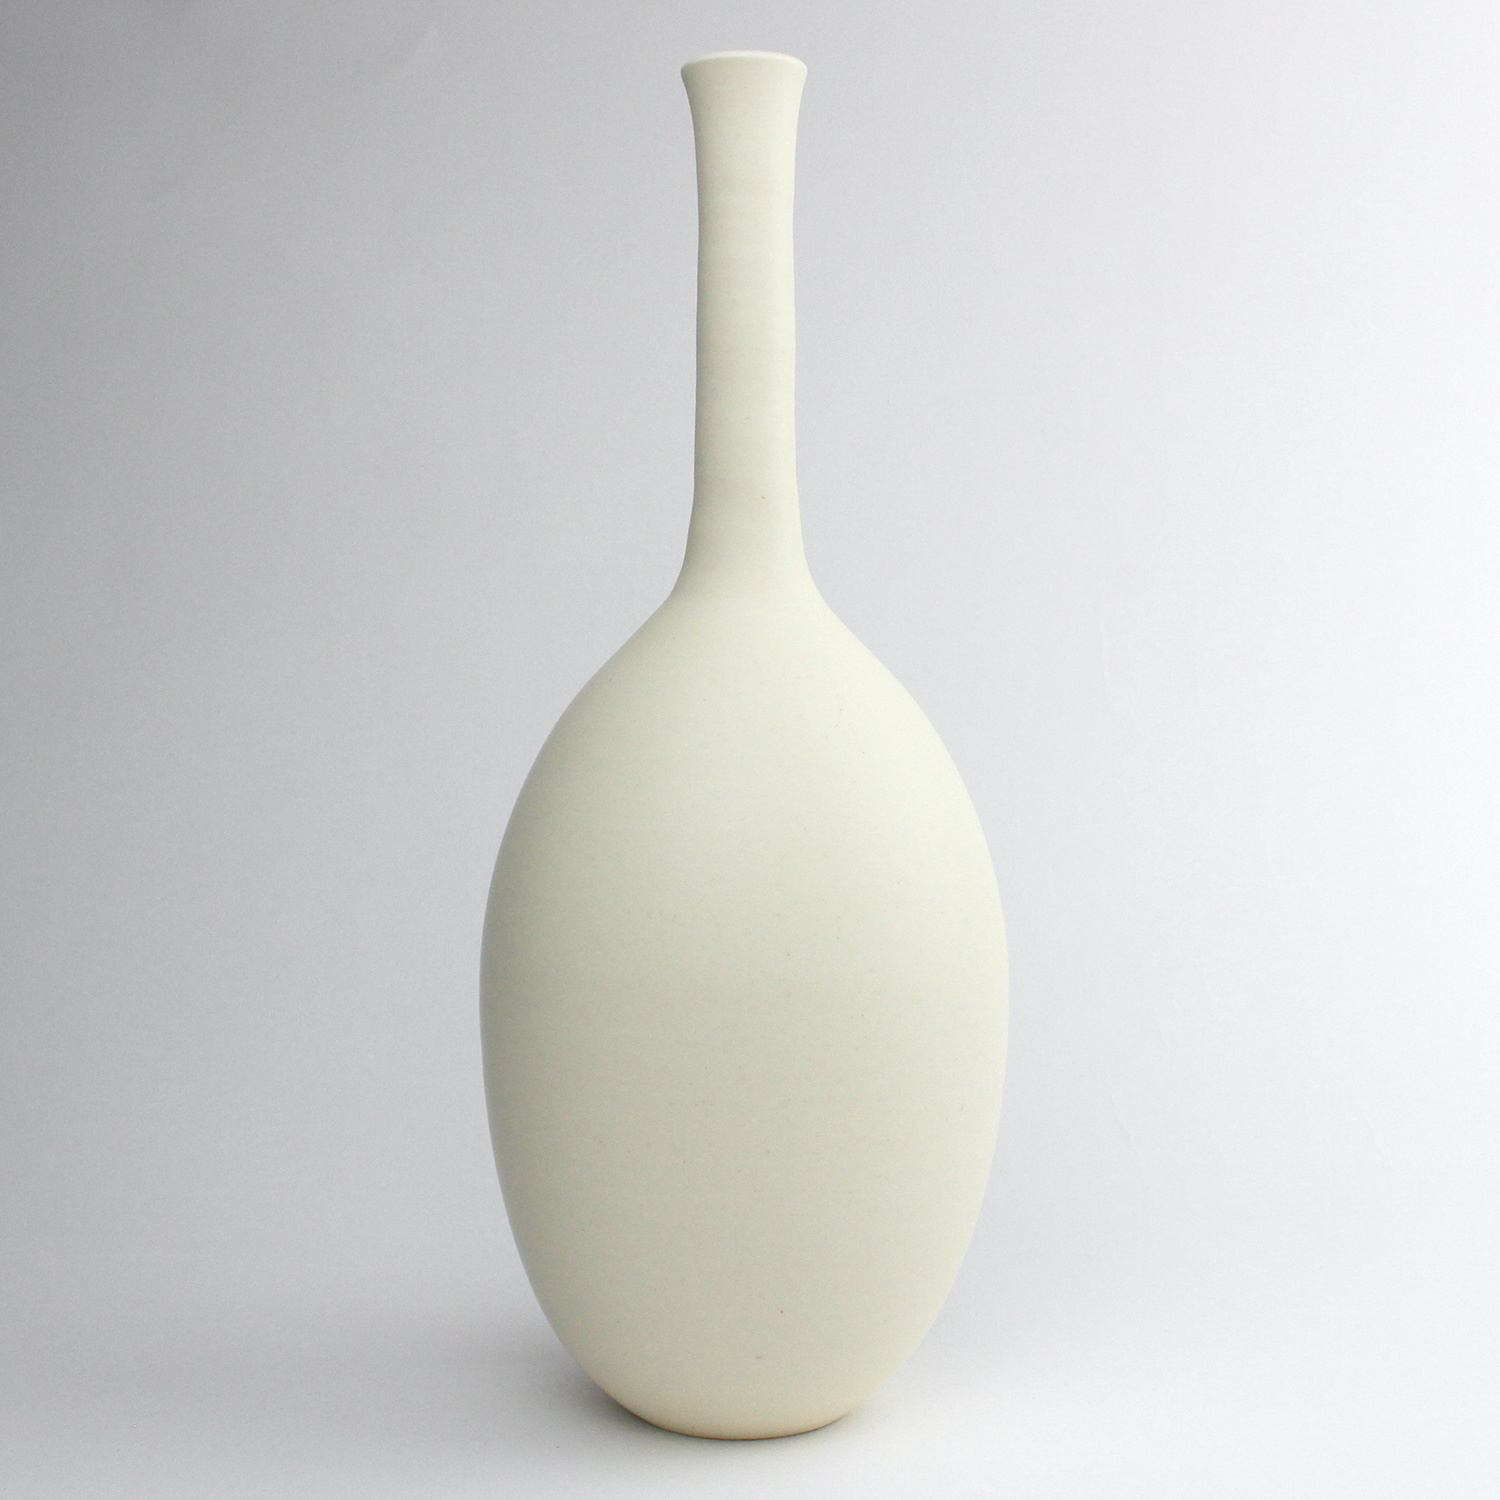 Long-necked Oval Vase, ivory by Lucy Burley